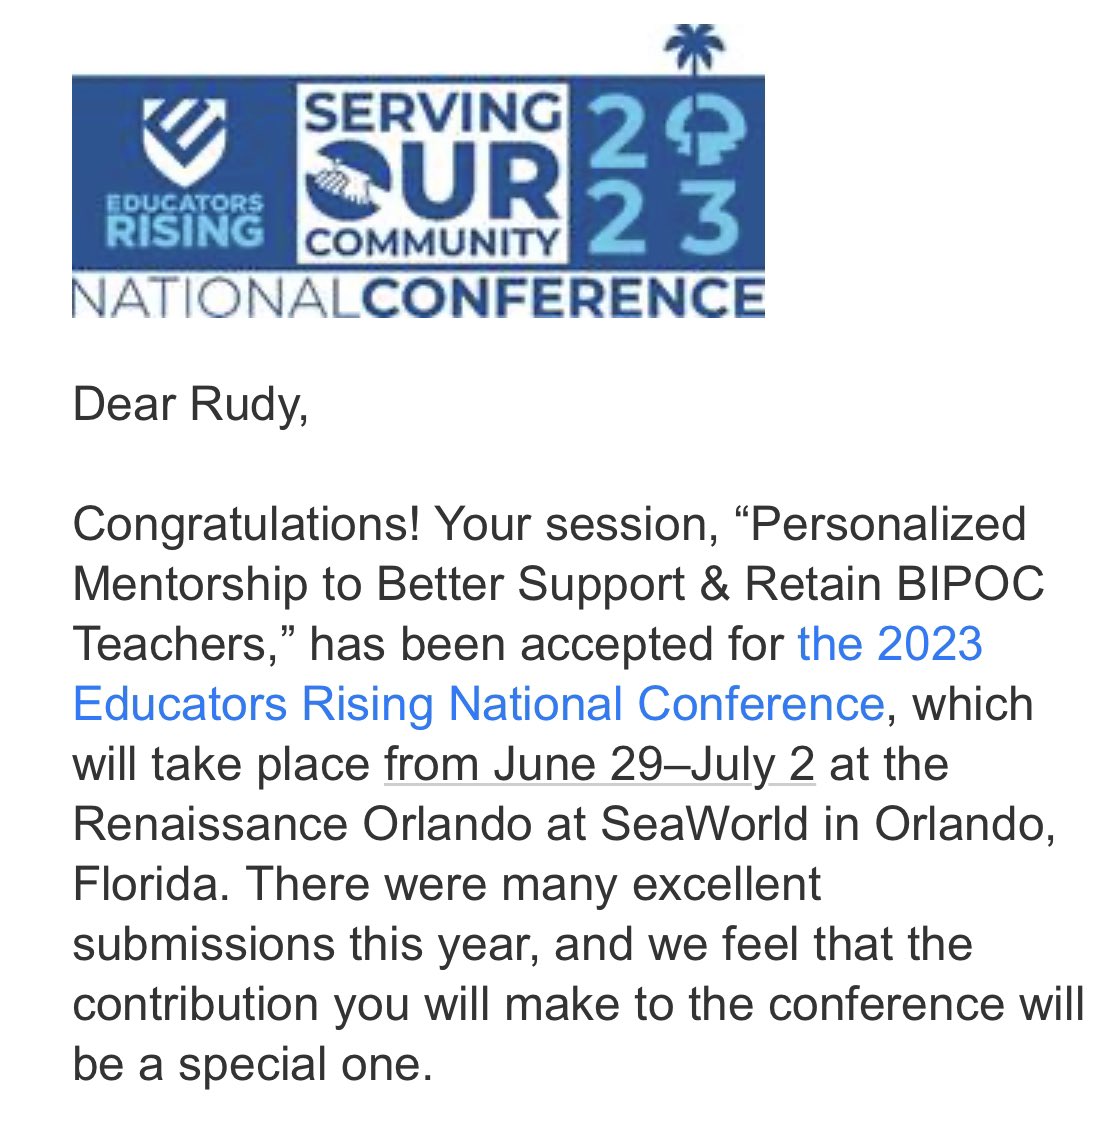 We’re looking forward to returning to the @EducatorsRising National Conference this summer - this time to present!